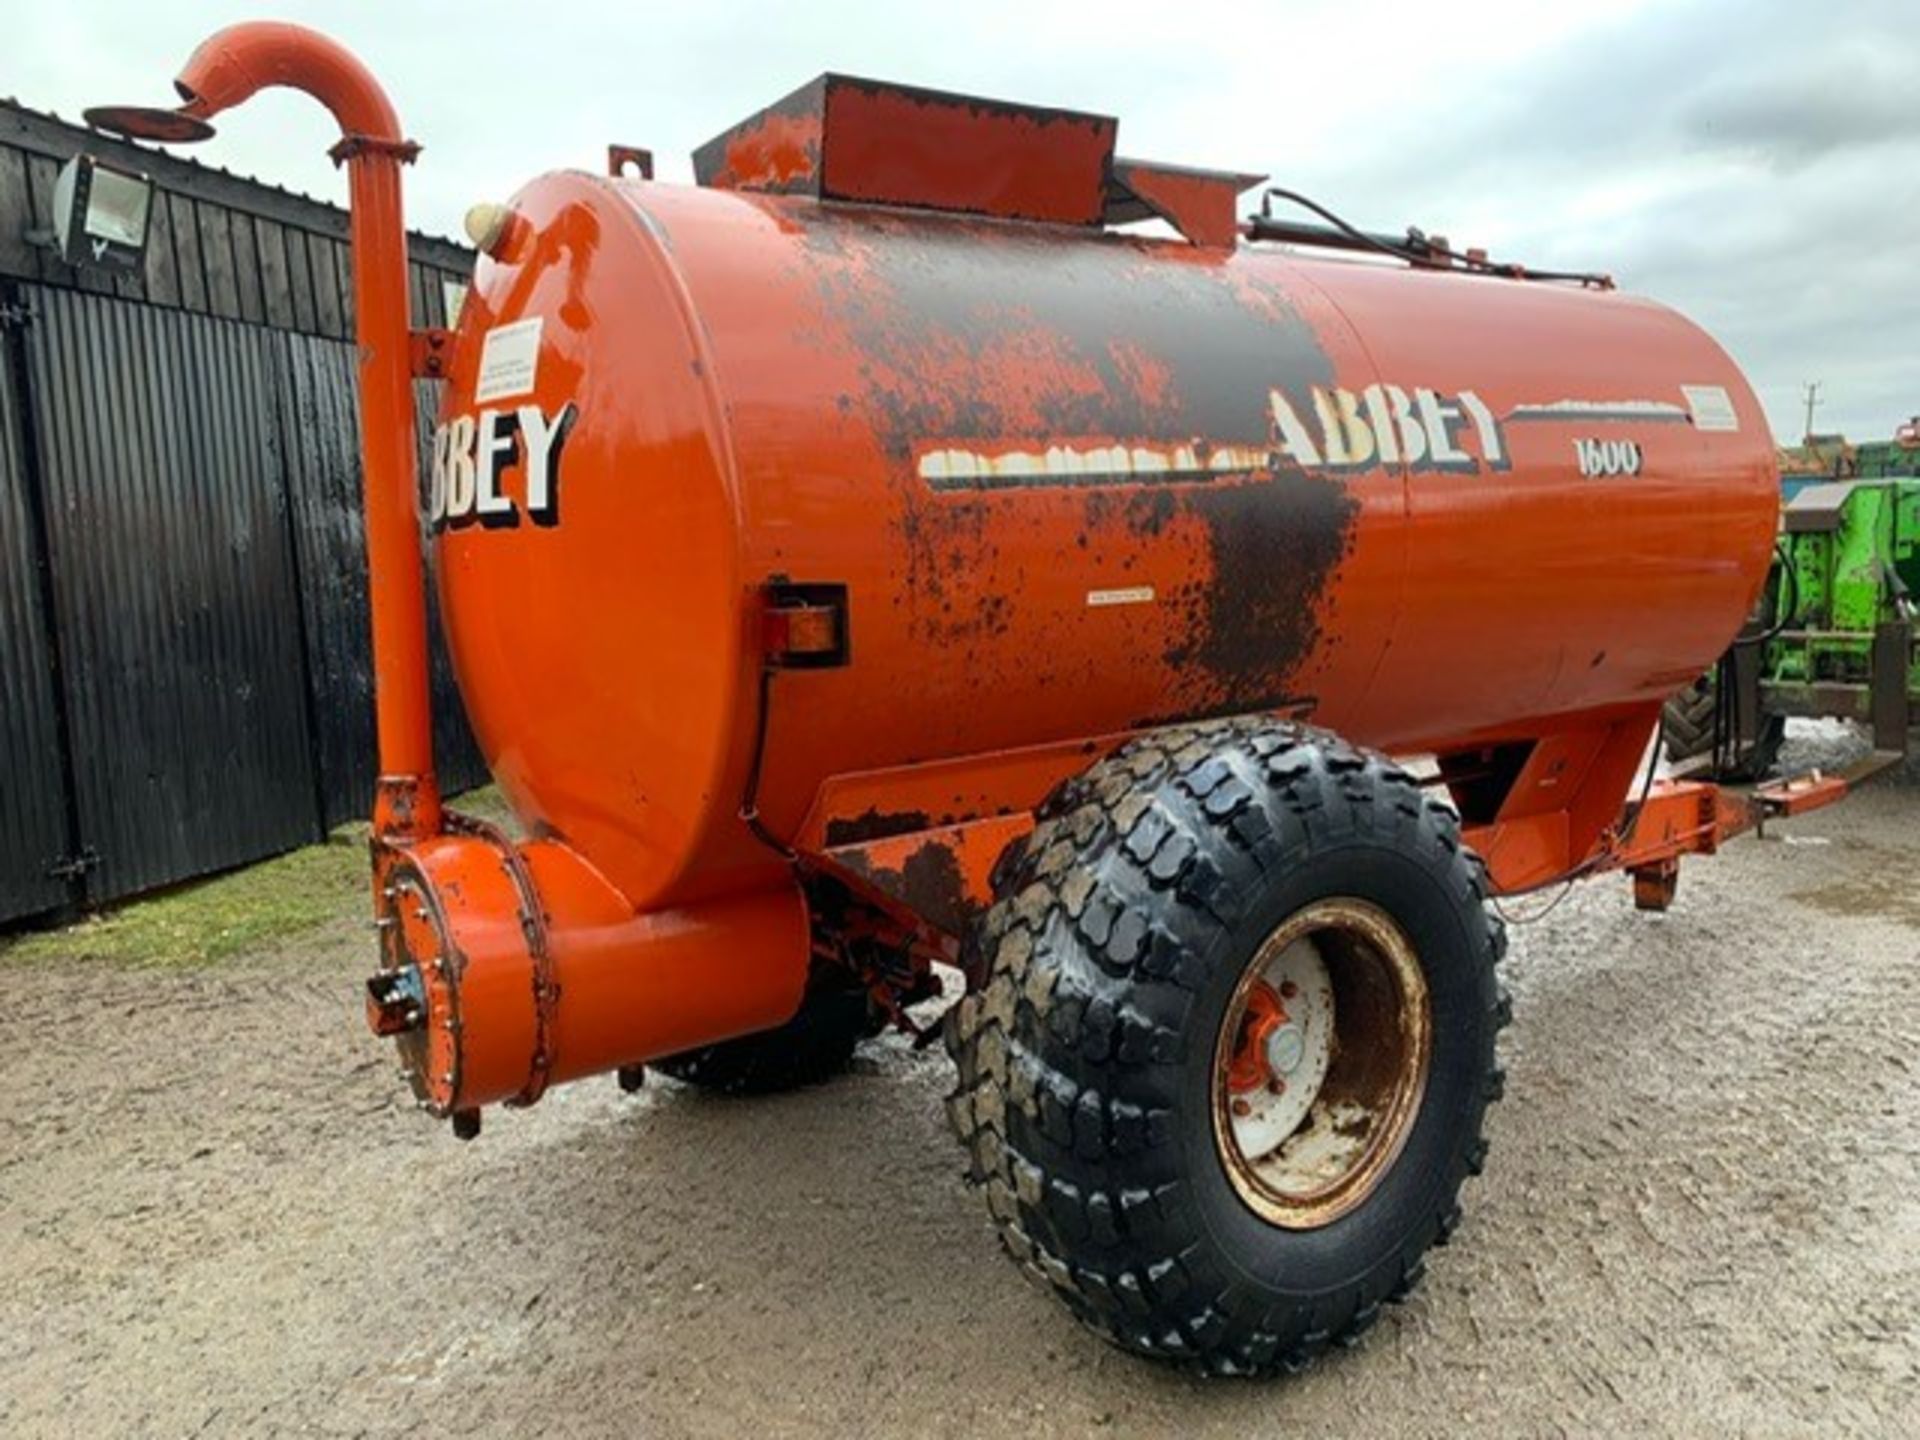 ABBEY 1600 GALLON TOP FILL TANKER - Image 3 of 8